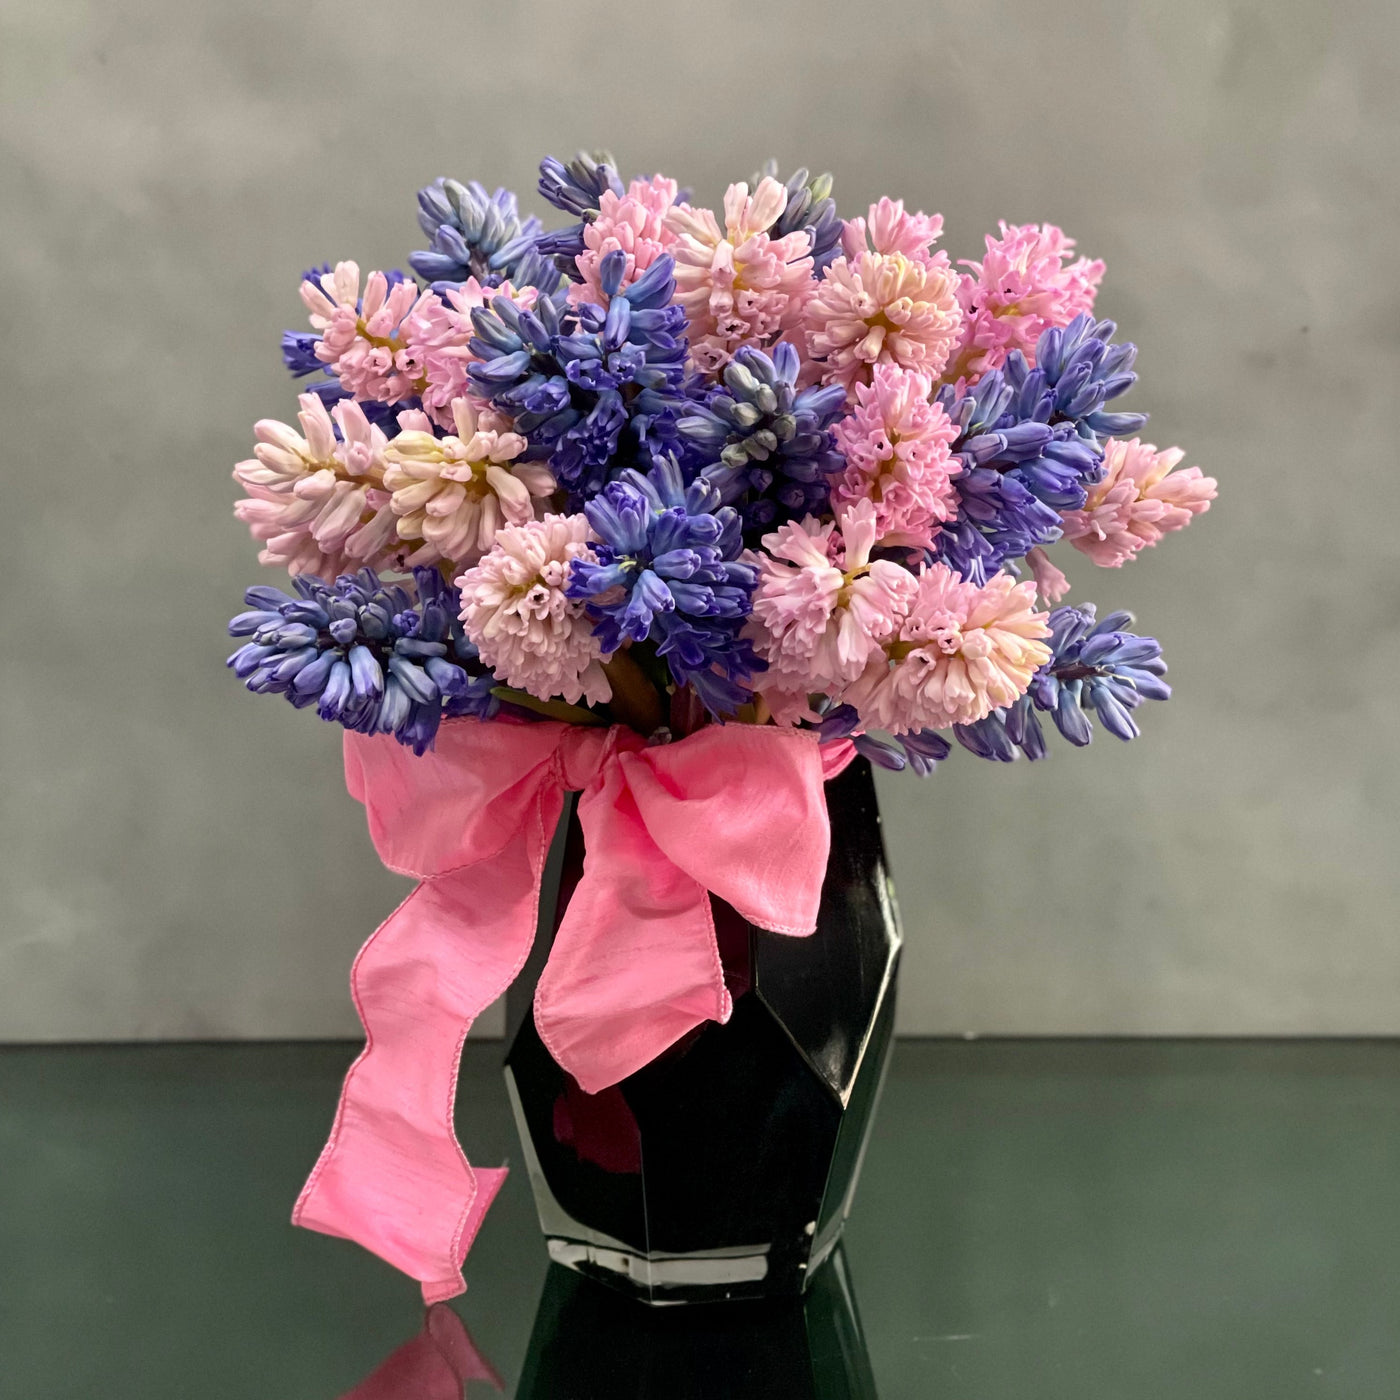 Bold and Beautiful, Beverly Hills Florist presents Hiya for same day delivery ! Enjoy the sweet smell of 30 colorful hyacinths in a black geometric medium vase.   Substitutions available upon request. Standard shown. Birthday, Thank you, Thinking of you, welcome baby, welcome flowers